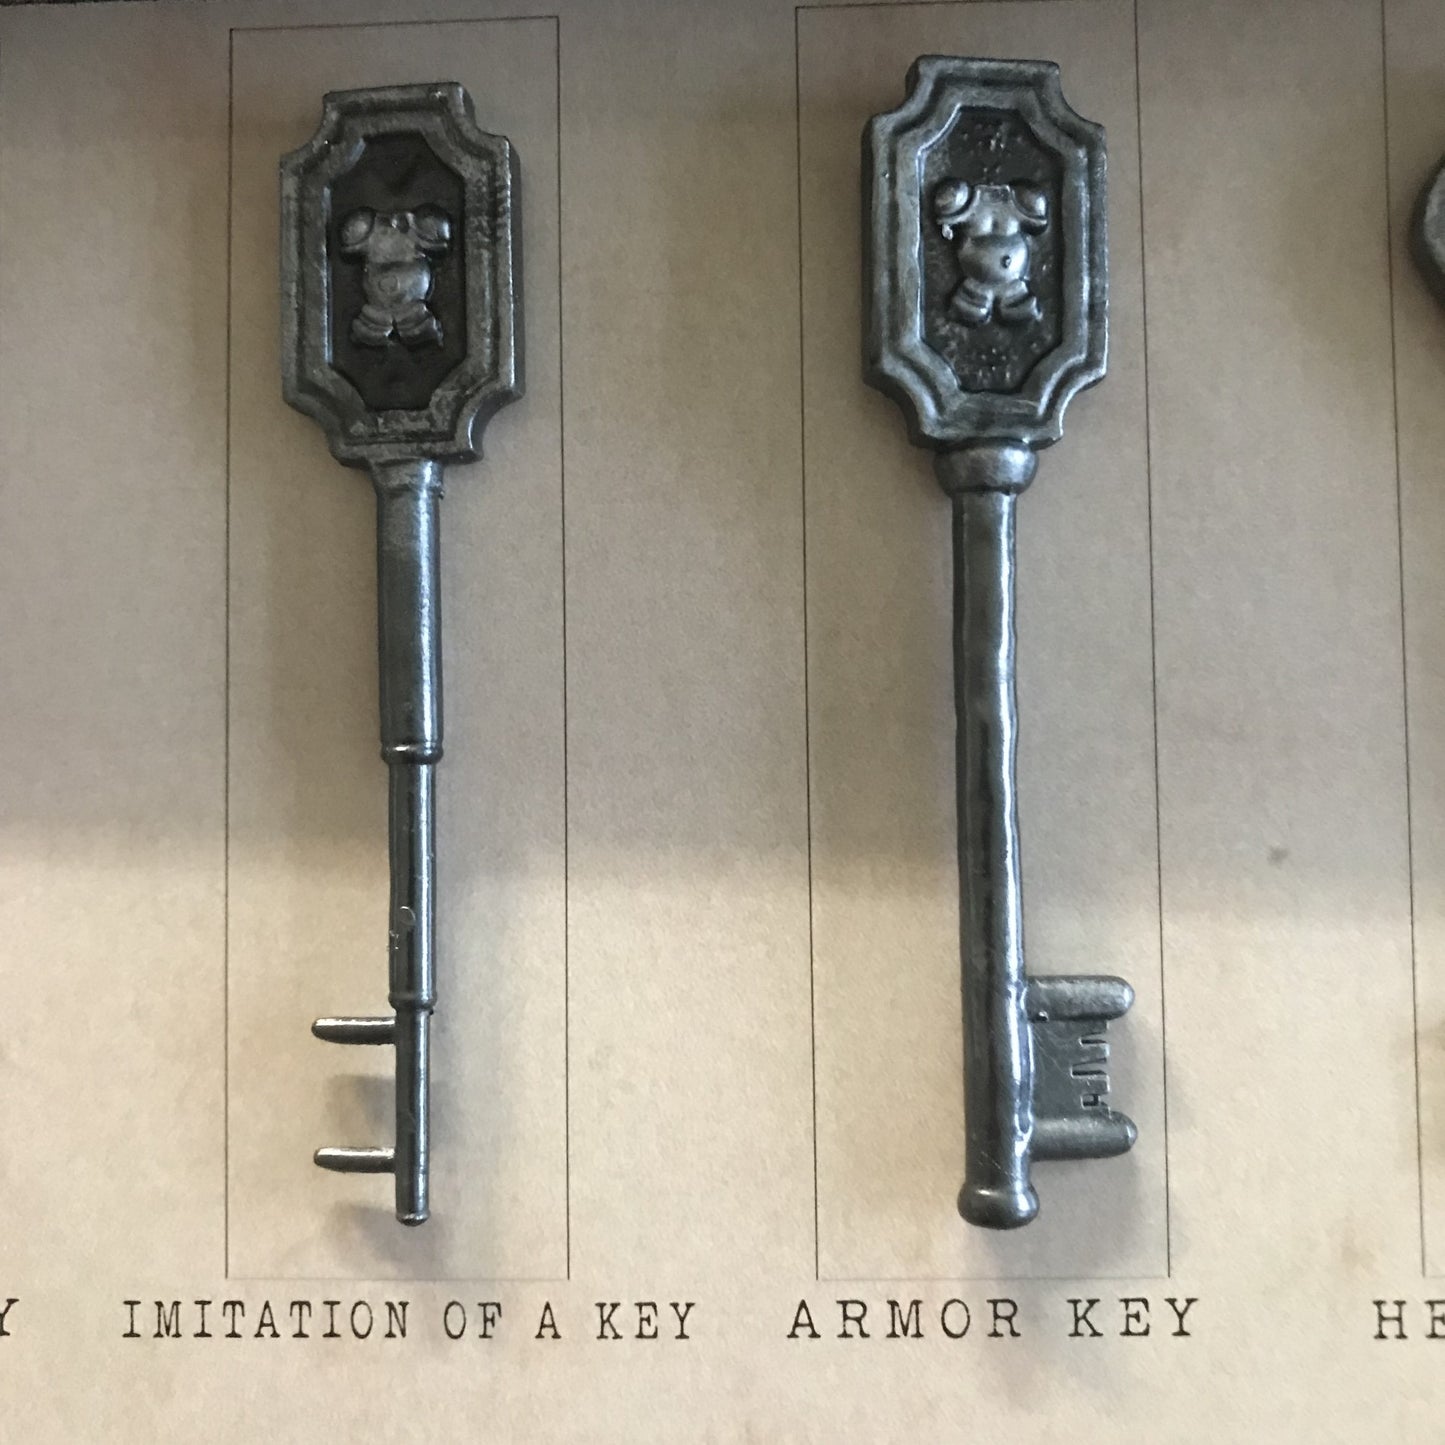 Resident Evil 1 Full Key Collection - A3 Size - Solid Resin Keys all handcrafted, painted and mounted! Perfect Mancave or Womencave gift